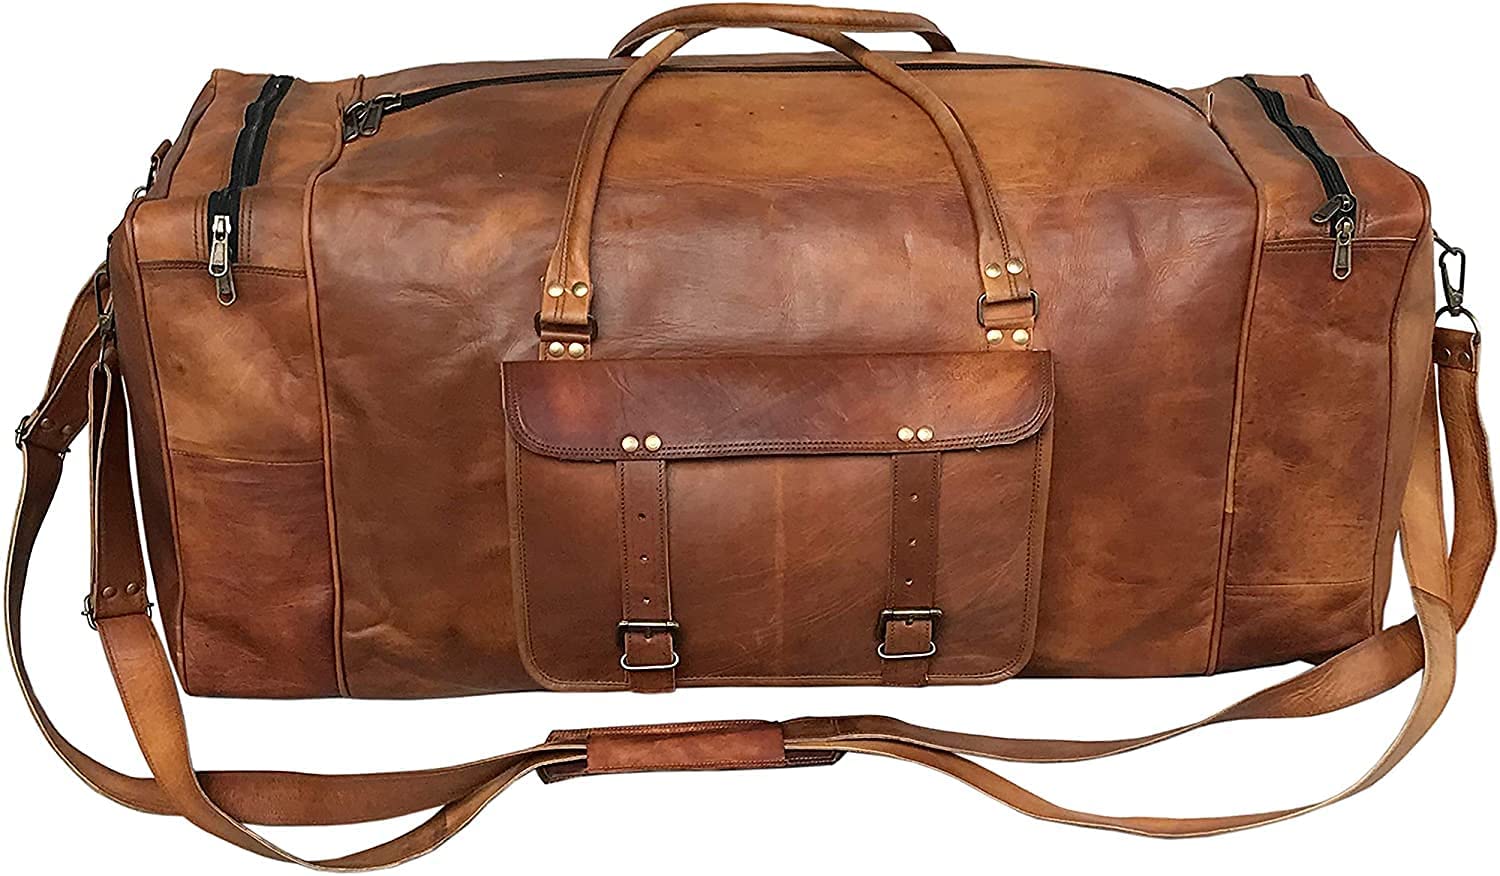 brown leather duffle bag 